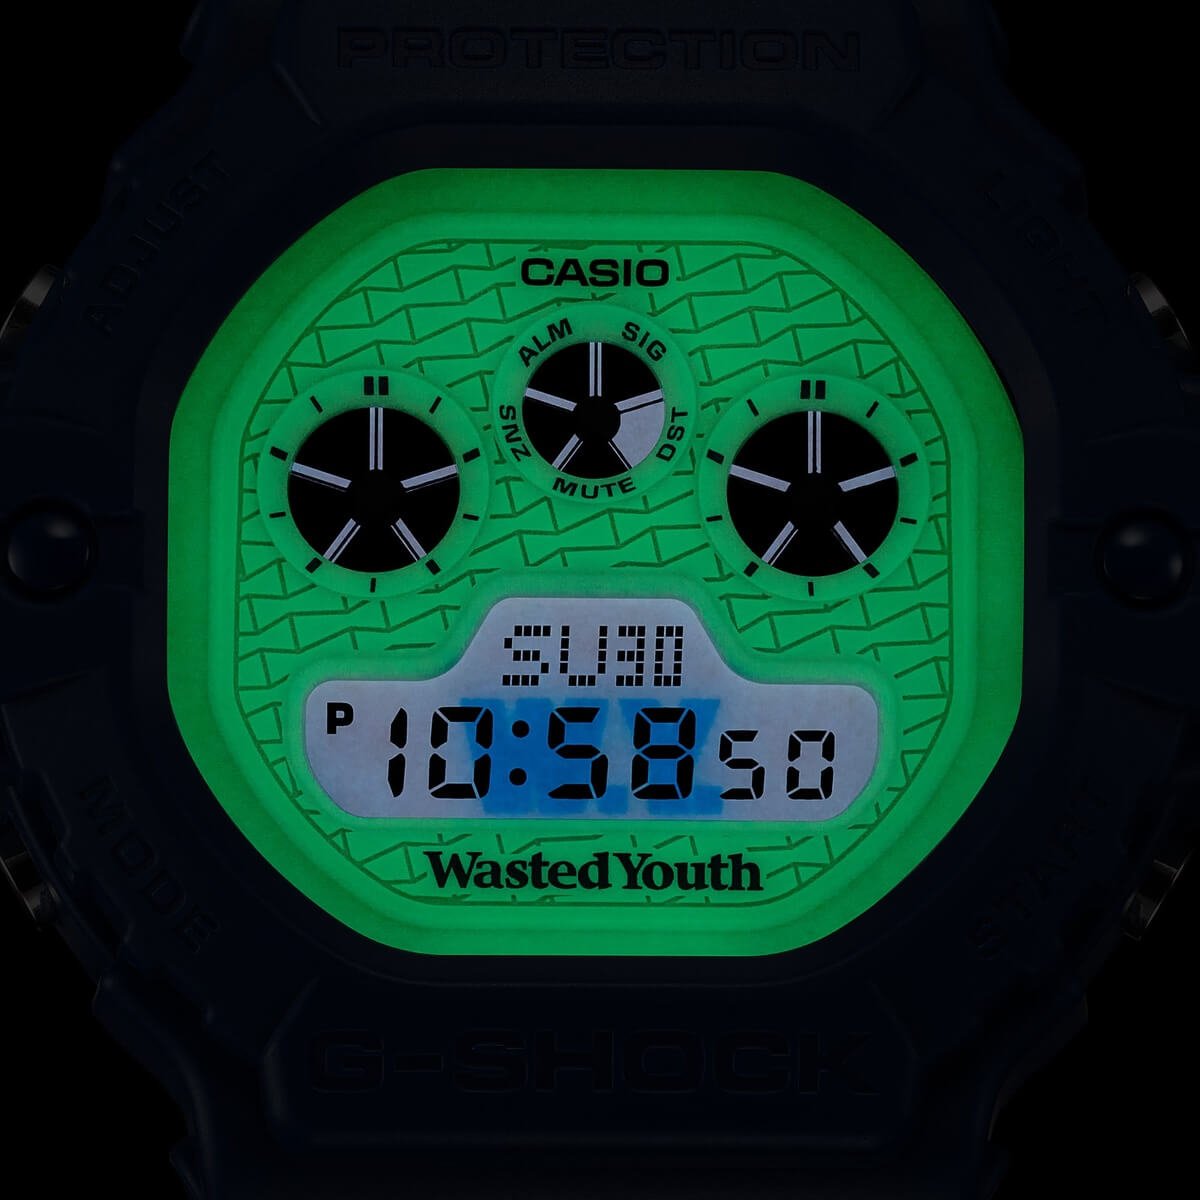 Wasted Youth x G-Shock DW-5900WY-2 collaboration features the 